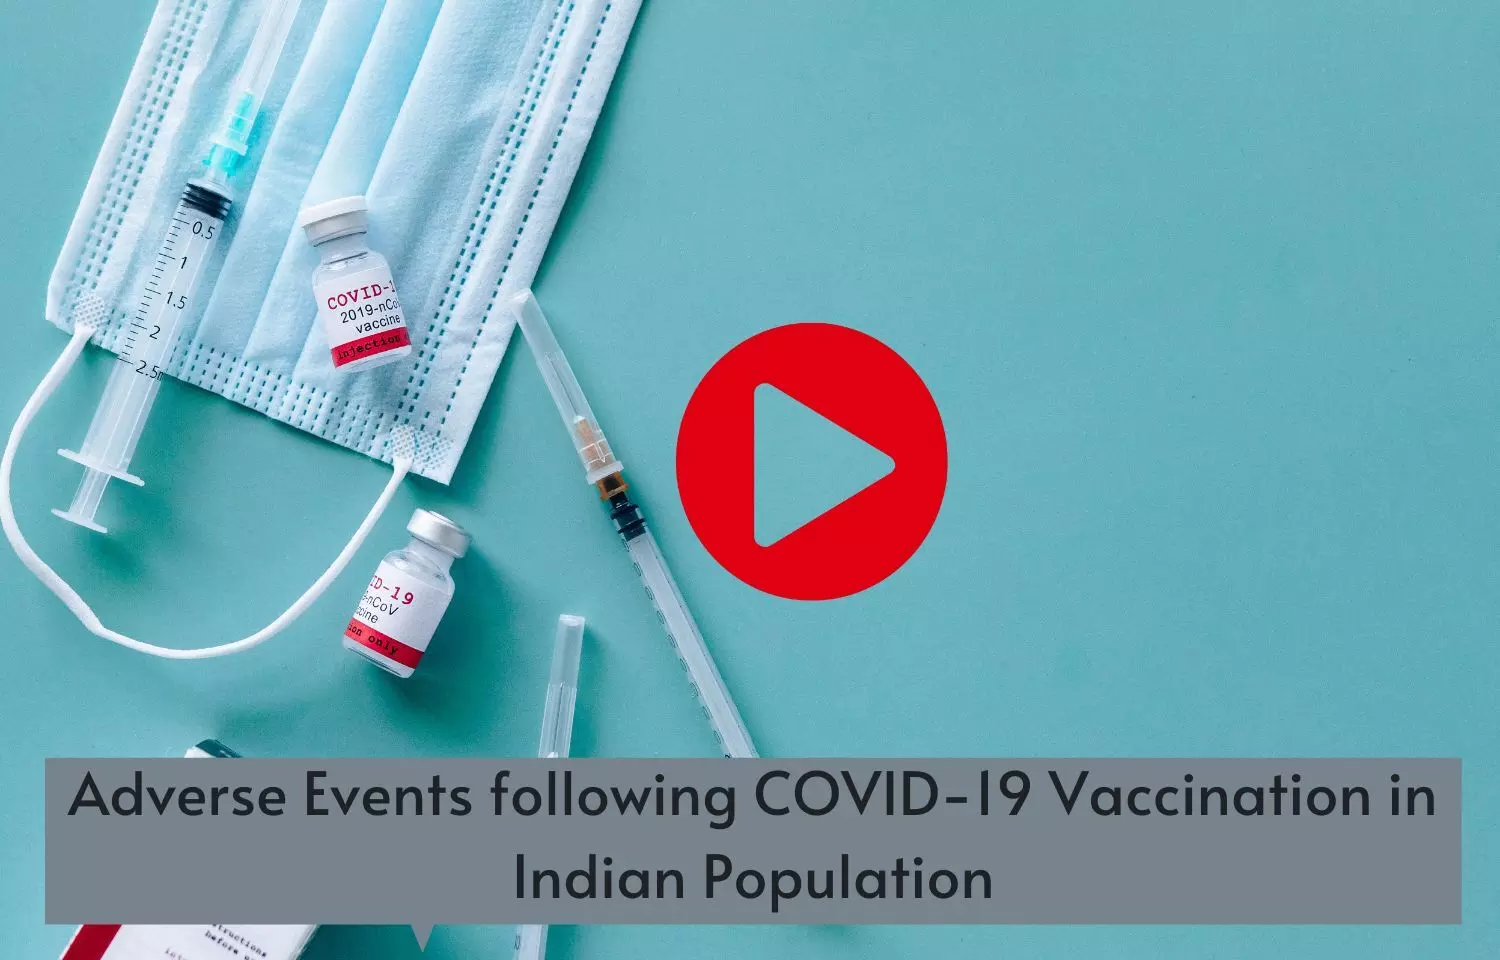 Adverse Events following COVID-19 Vaccination in Indian Population